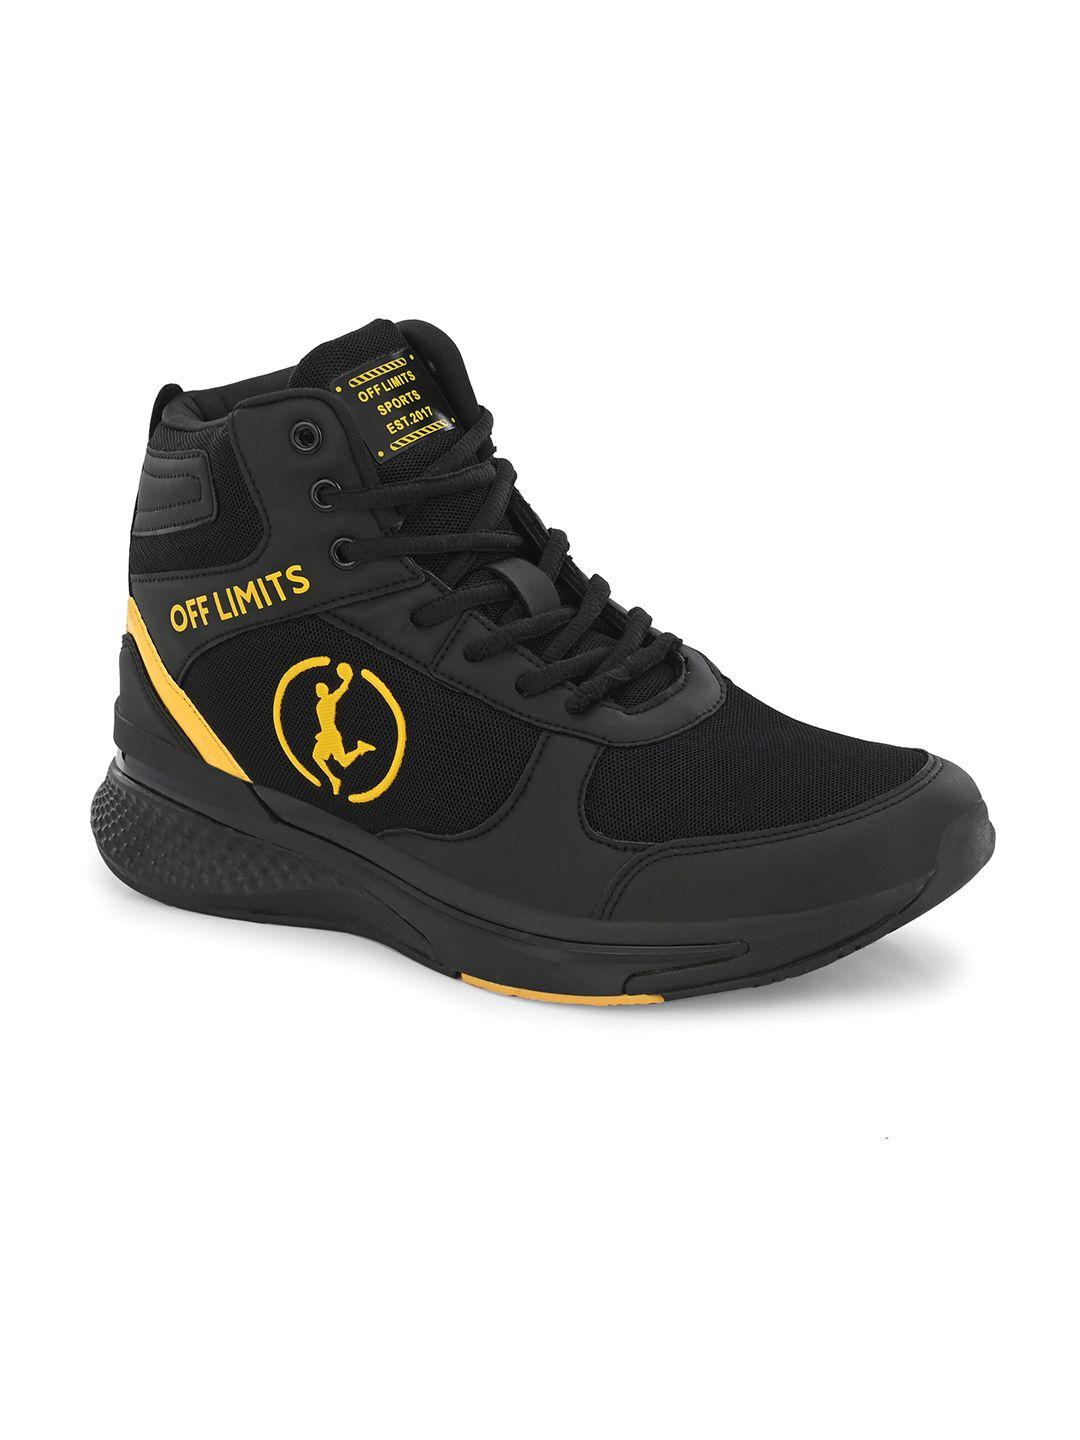 off limits men mesh mid top non-marking basketball shoes